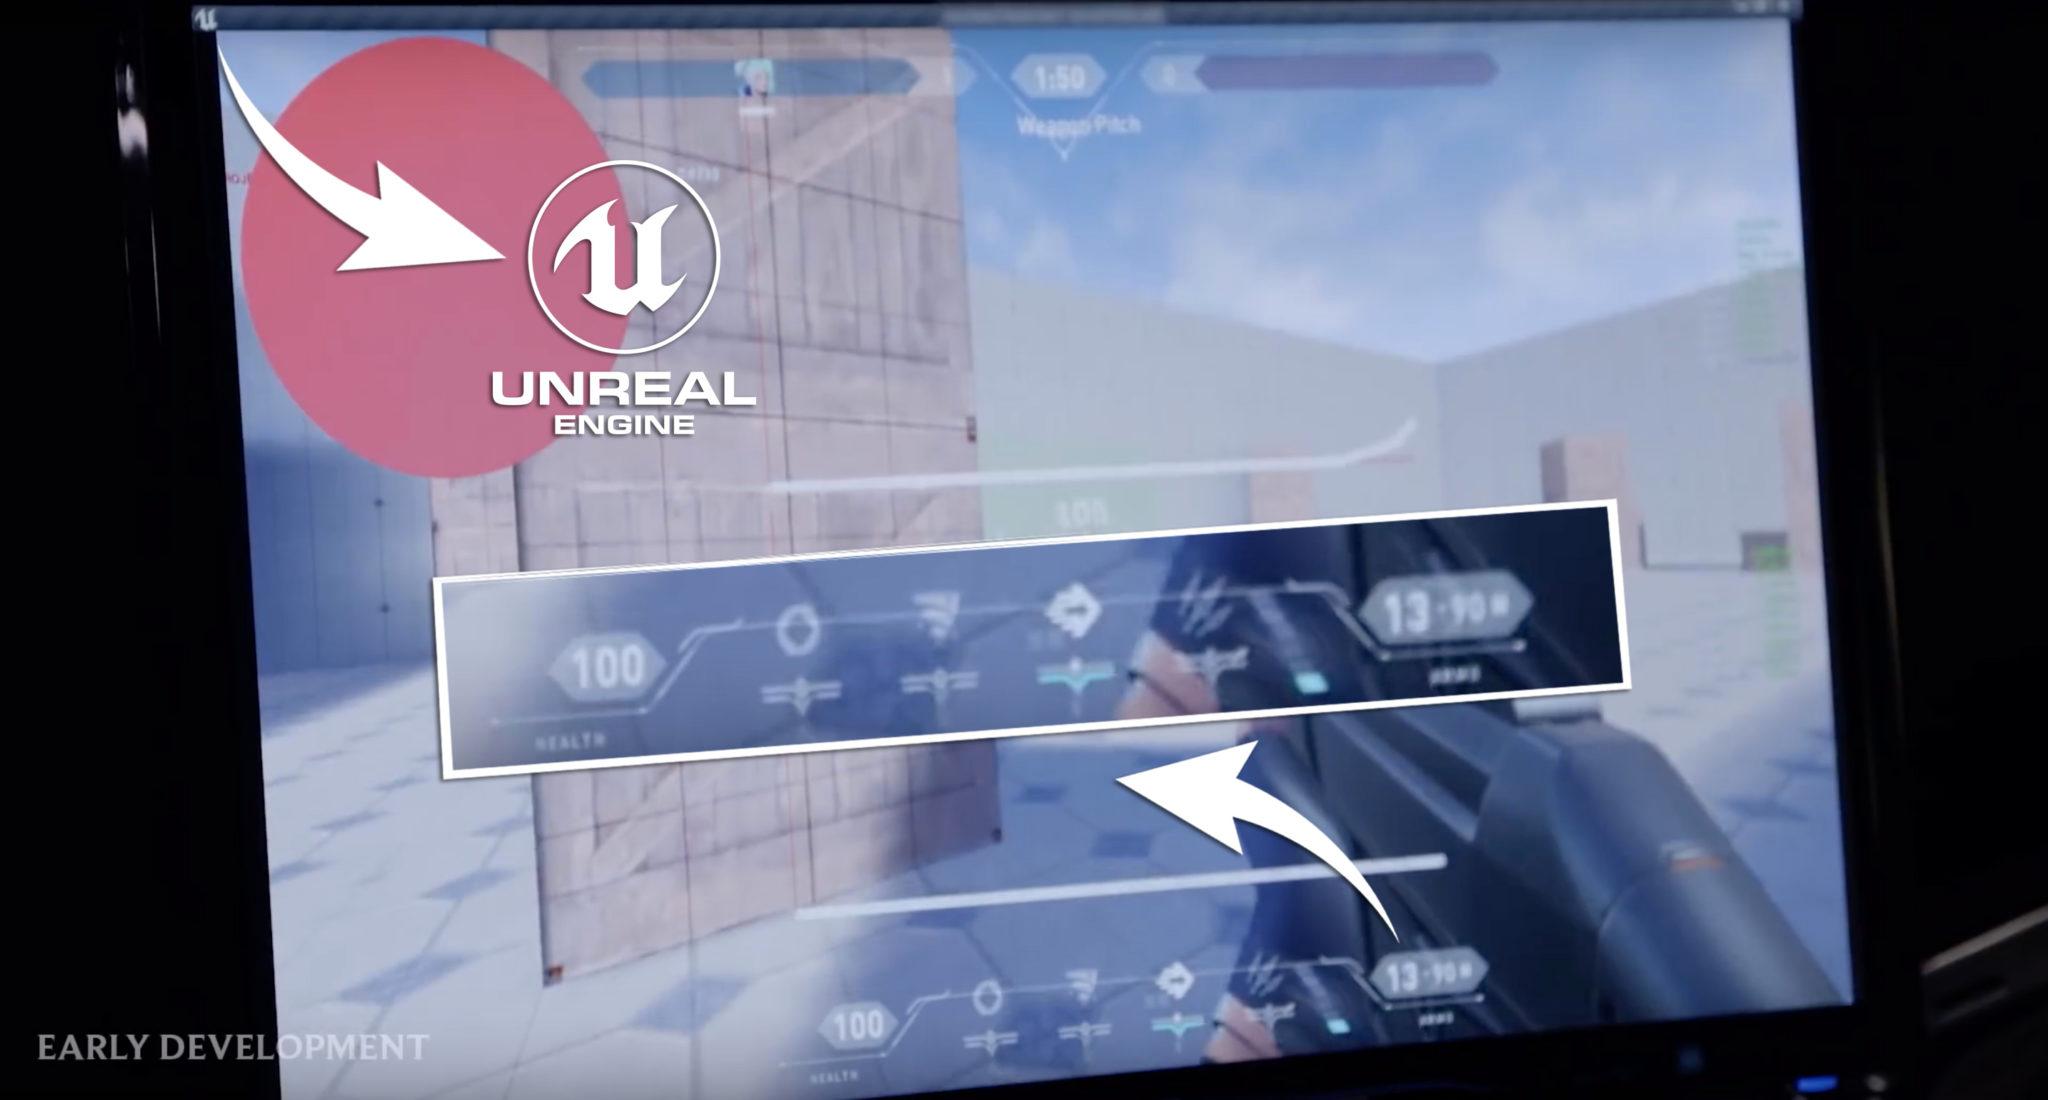 Project A's Unreal Engine.